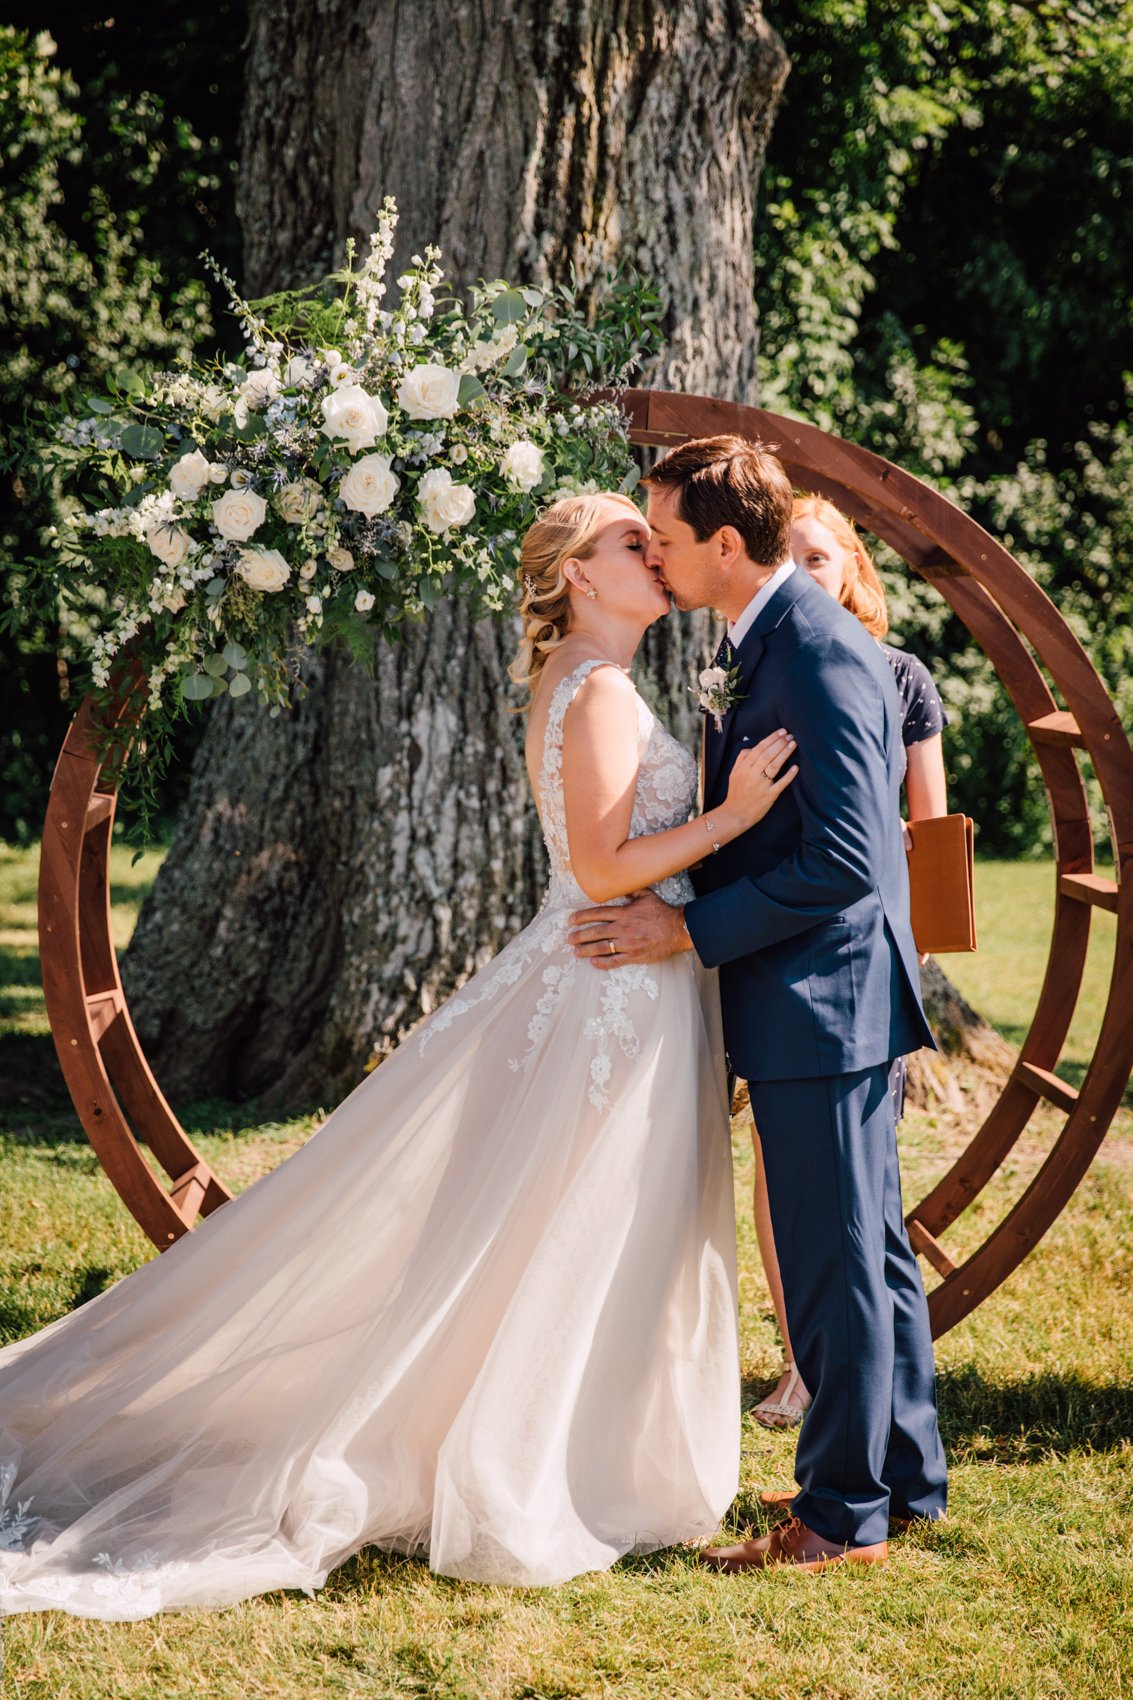  Bride and Groom share a first kiss at their outdoor wedding ceremony at Windridge Estate Red Barn, standing in front of a round arch with white roses and greenery 